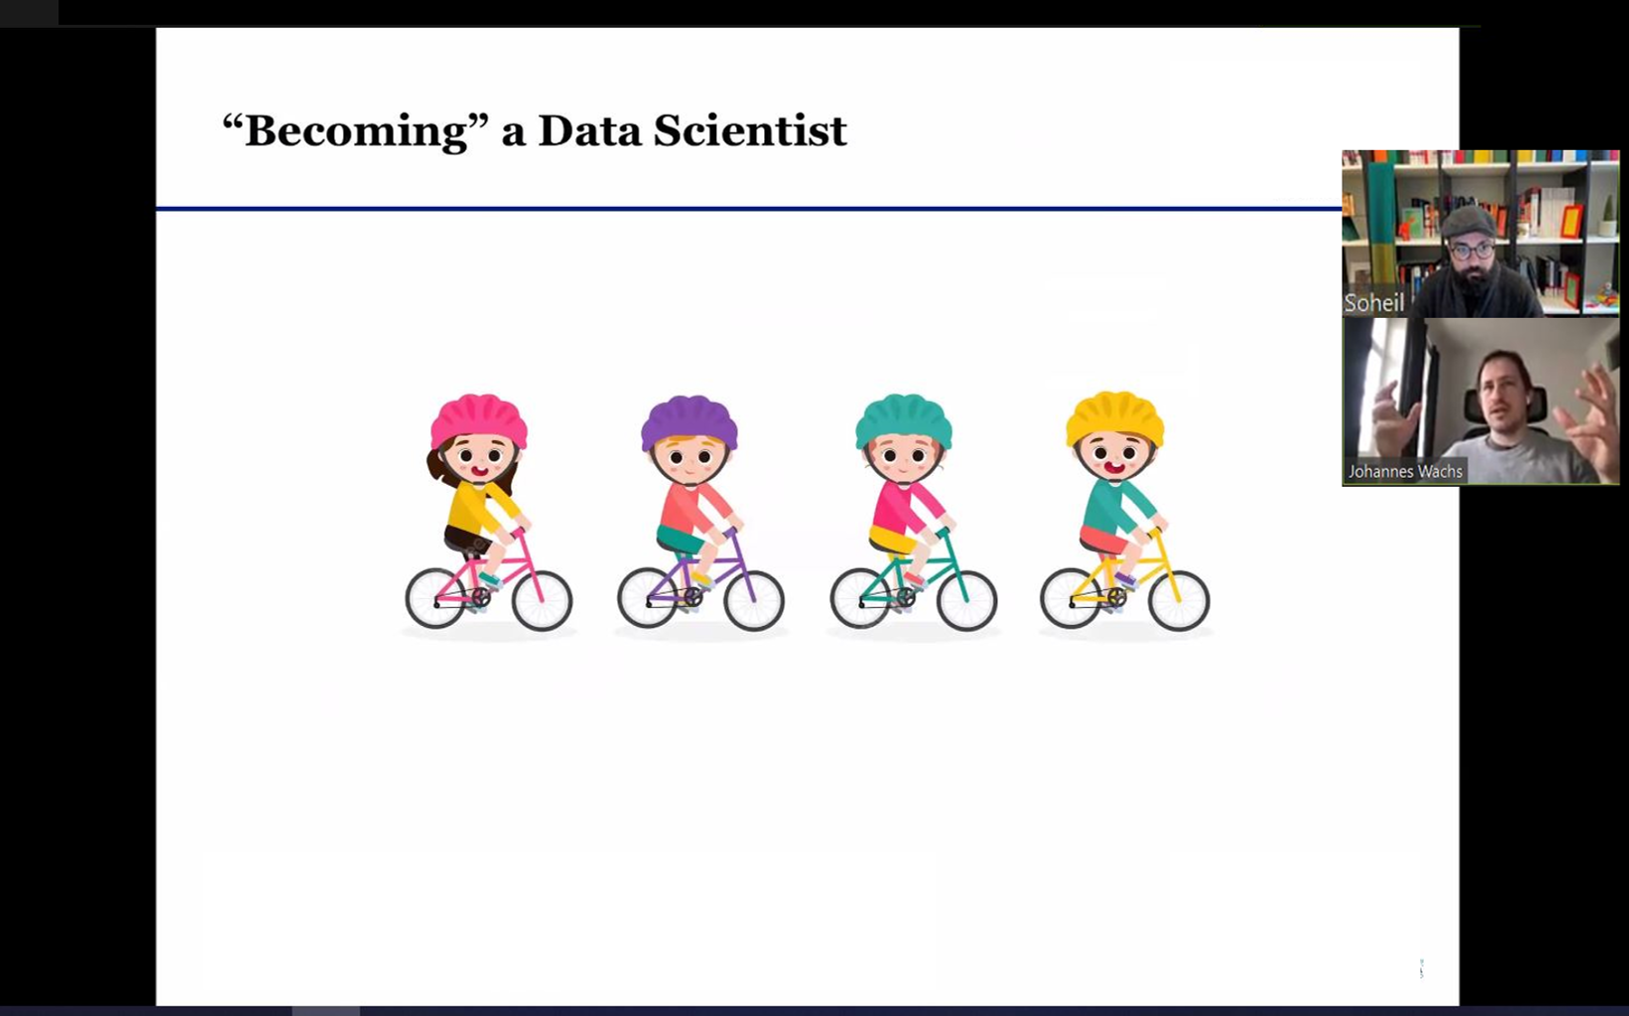 “Becoming” a Data Scientist